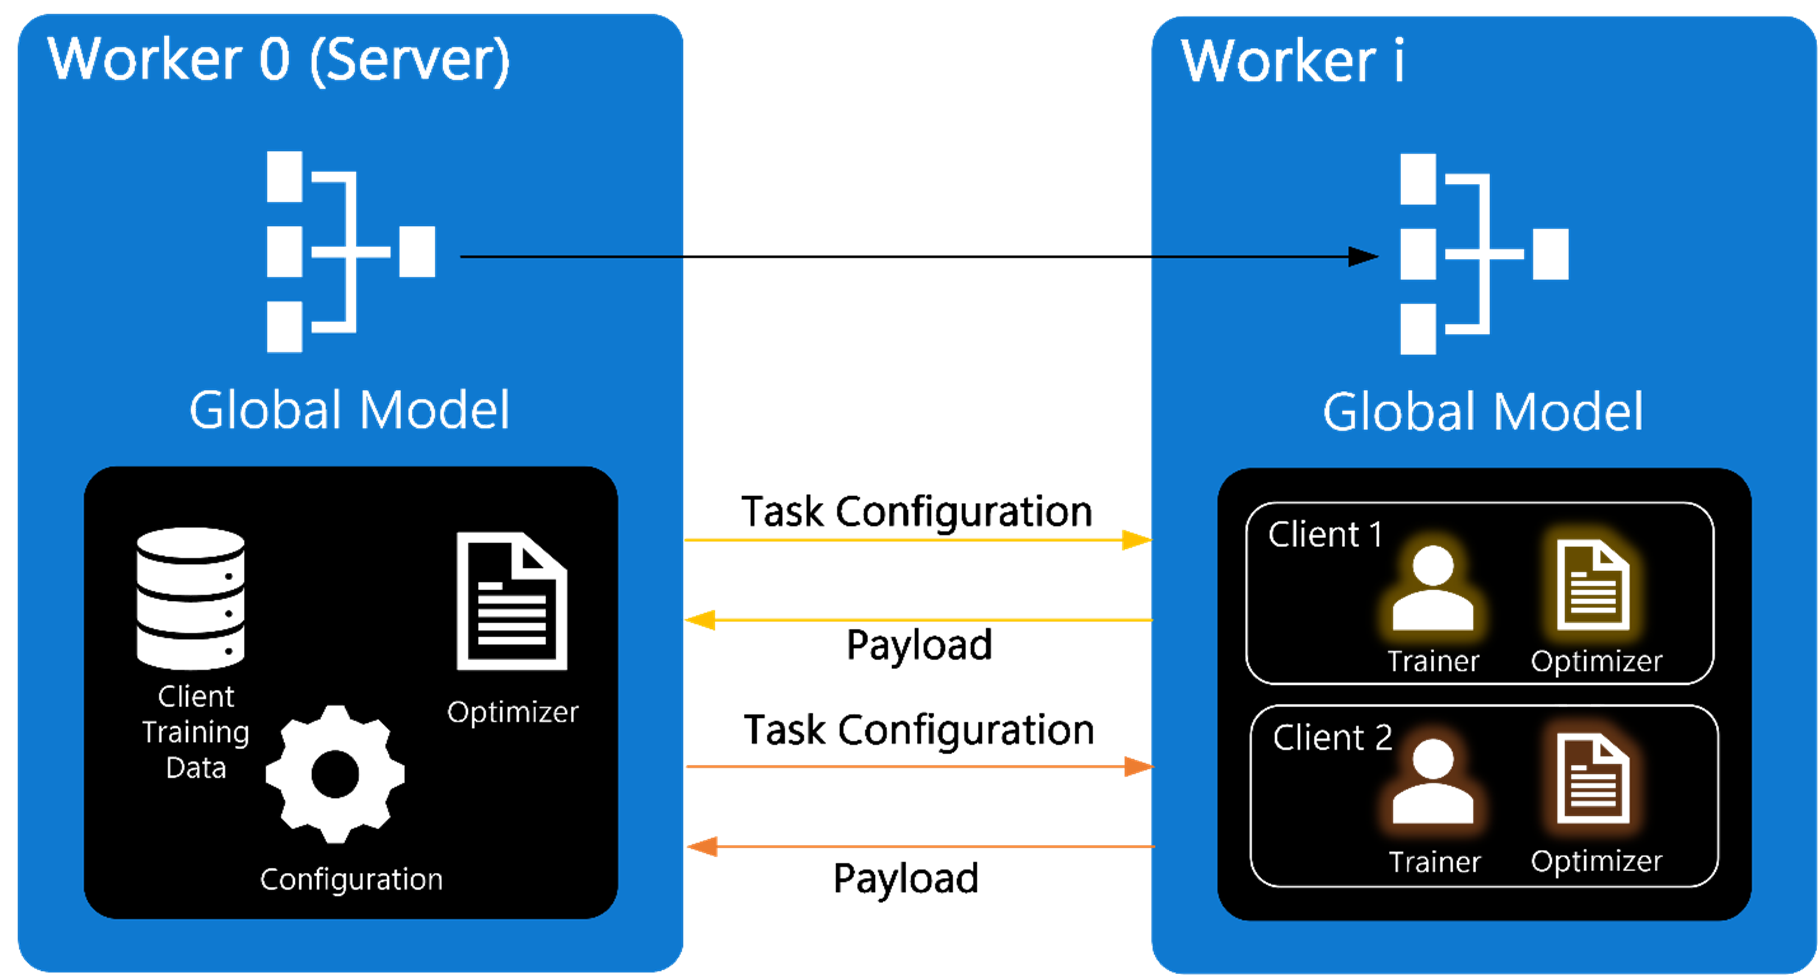 This diagram shows server-client communication under FLUTE’s architecture. Worker 0 that acts as the server and contains the global model, client training data, the configuration, and the optimizer. Worker i receives a copy of the global model plus the task configuration. It also contains clients that are composed of the trainer and the optimizer. Each client sends the payload back to Worker 0. 